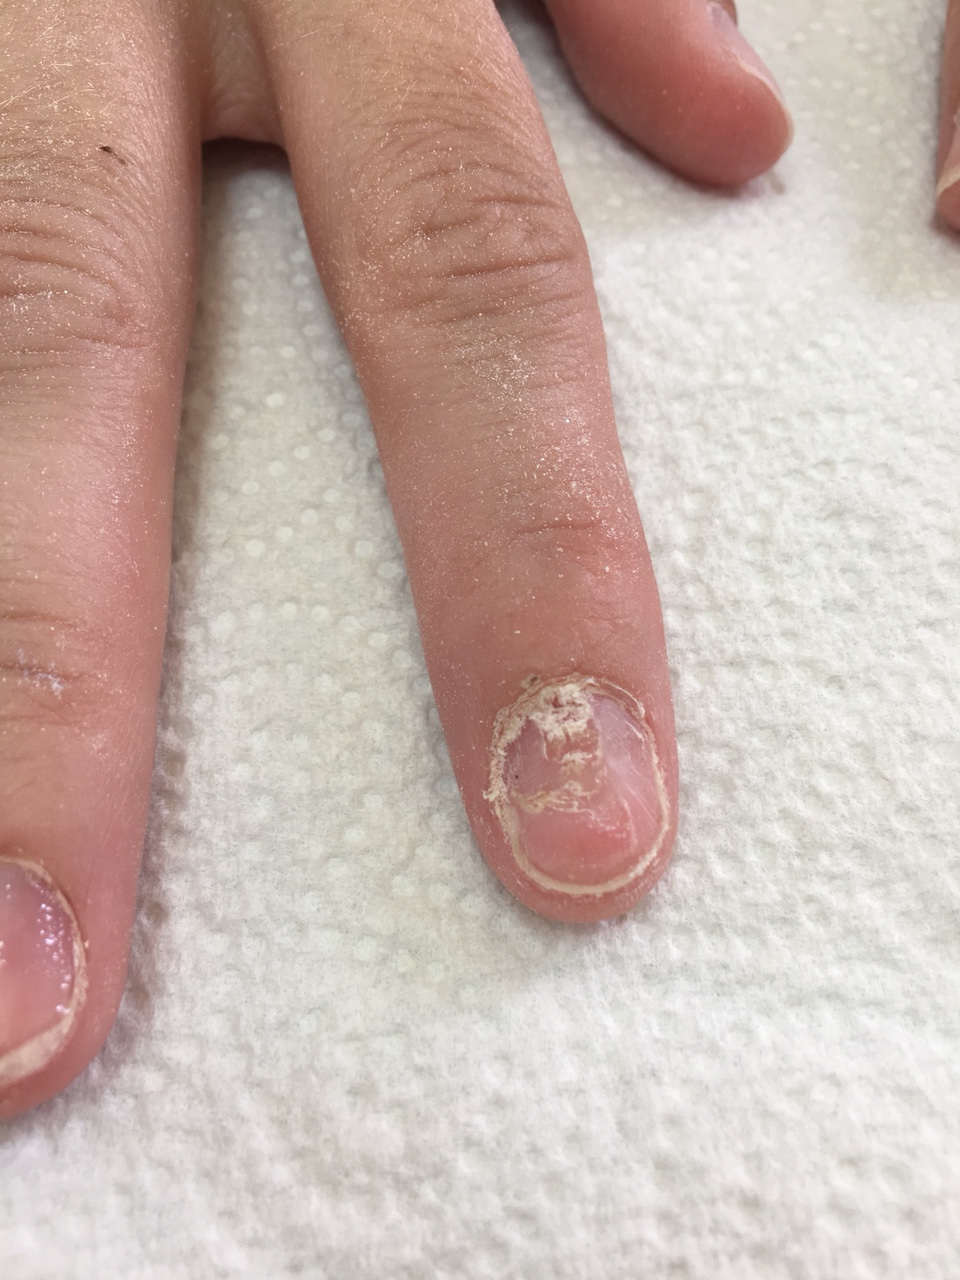 Clinico-etiological Study of Nail Disorders at a Tertiary Care Center in  Maharashtra, India | Journal of Skin and Stem Cell | Full Text